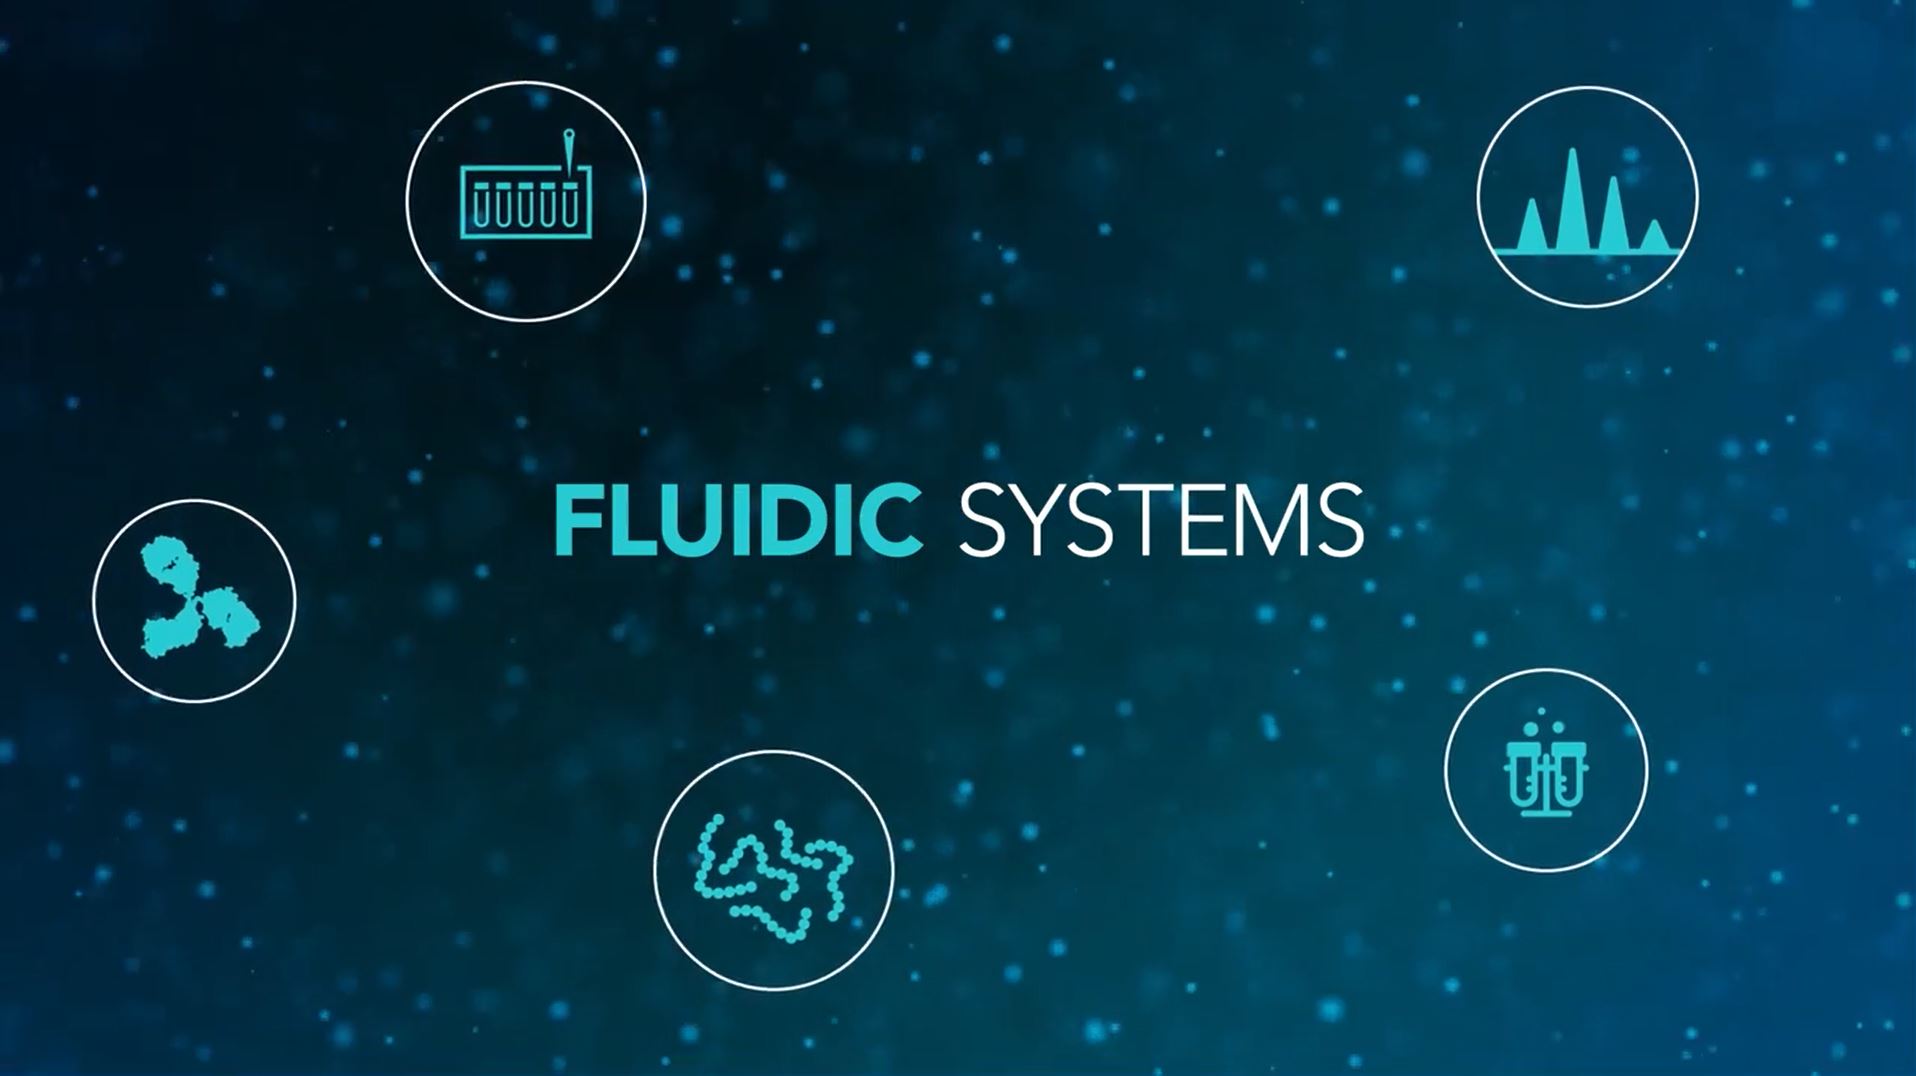 fluidic systems capabilities icons